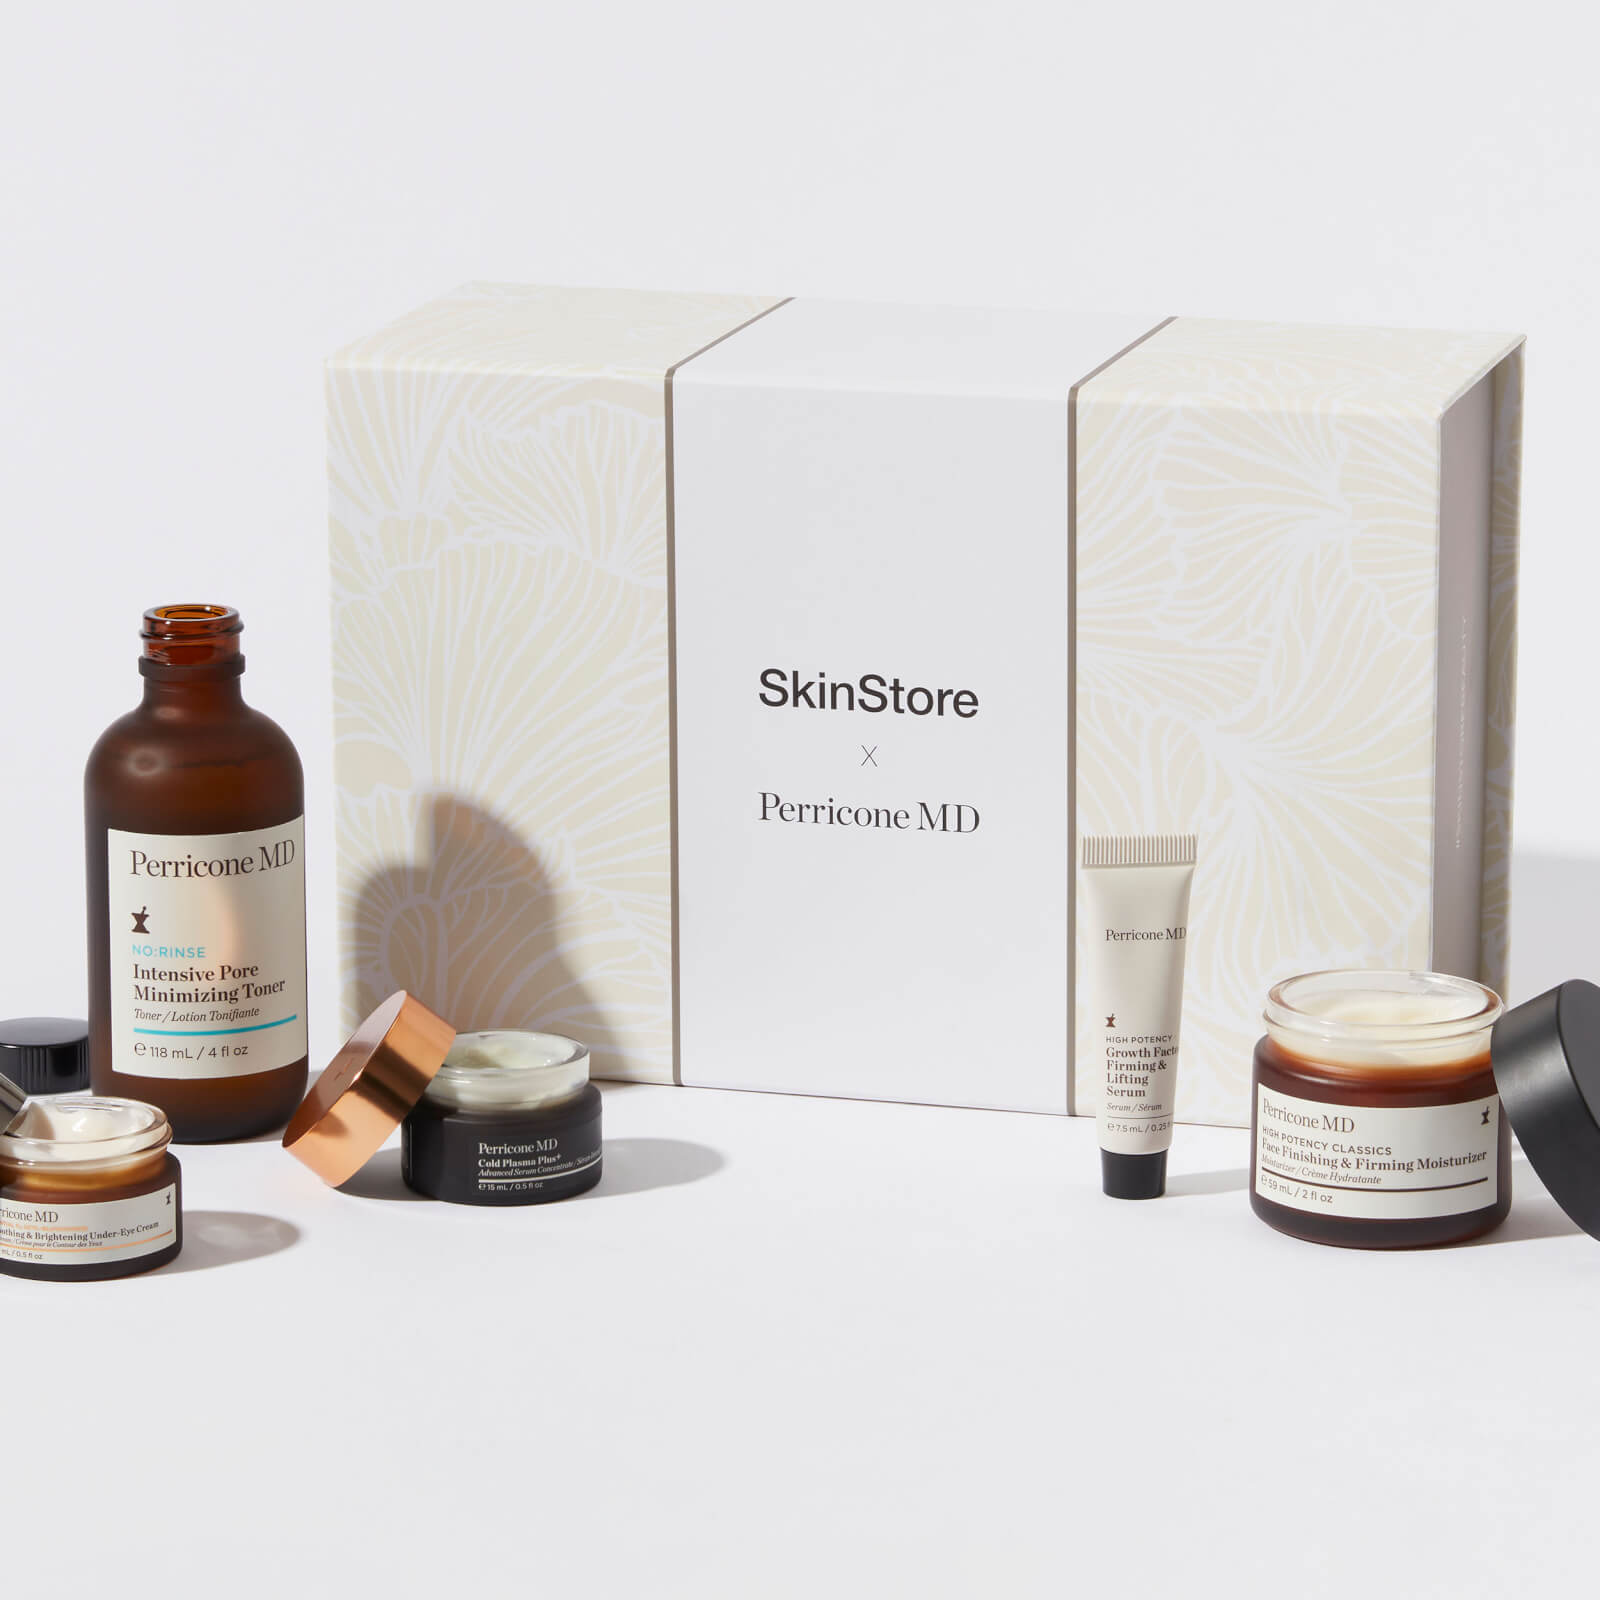 SkinStore Black Friday Deal – Get The Perricone MD Limited Edition Box For $71.20!